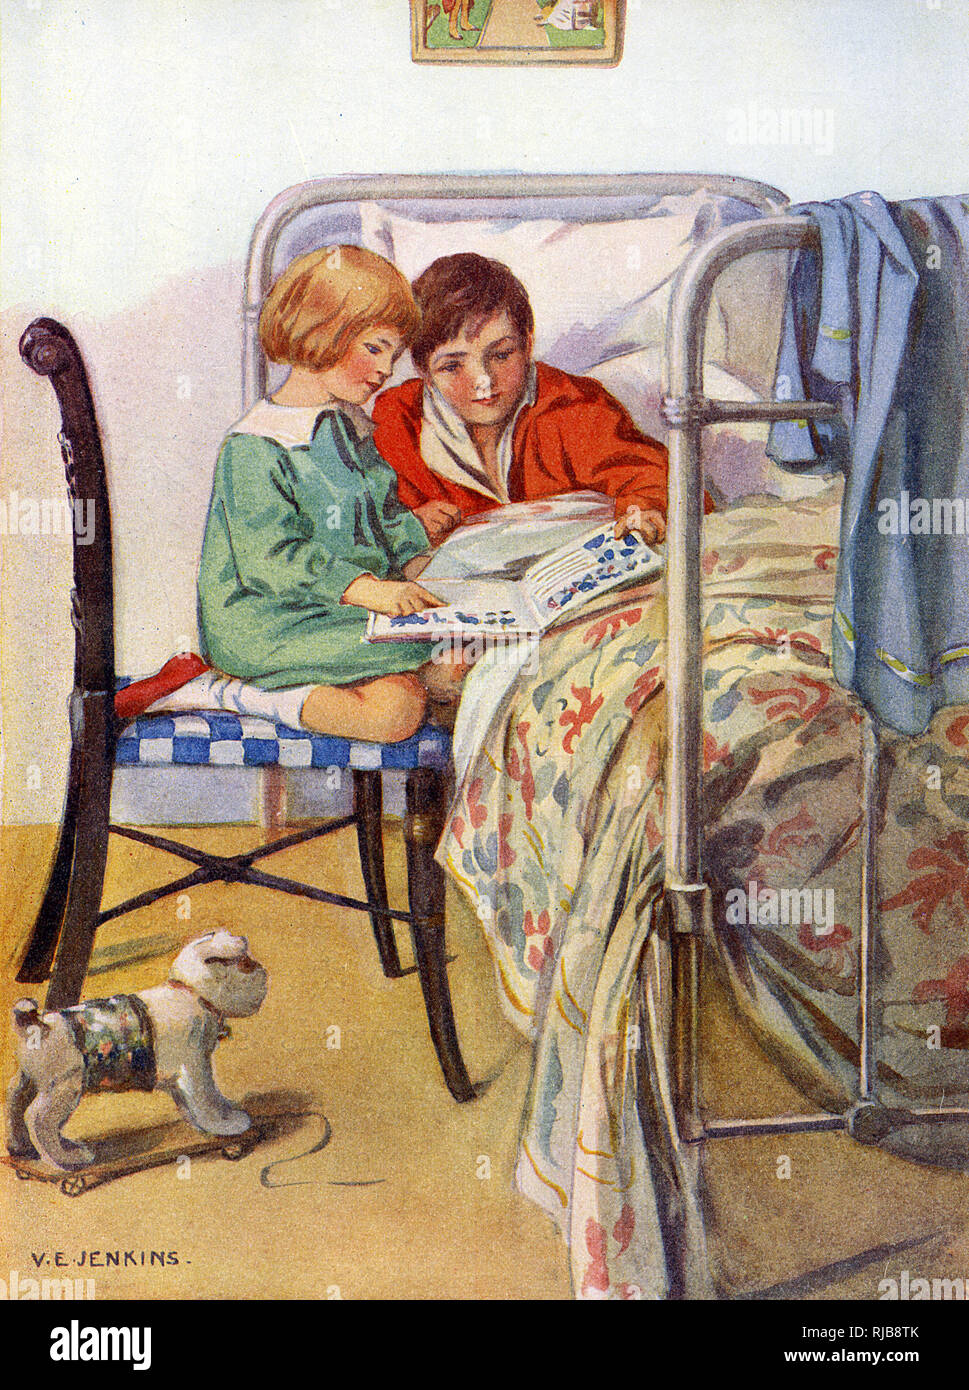 A little girl reads a book with an invalid friend who is recuperating in bed. Stock Photo